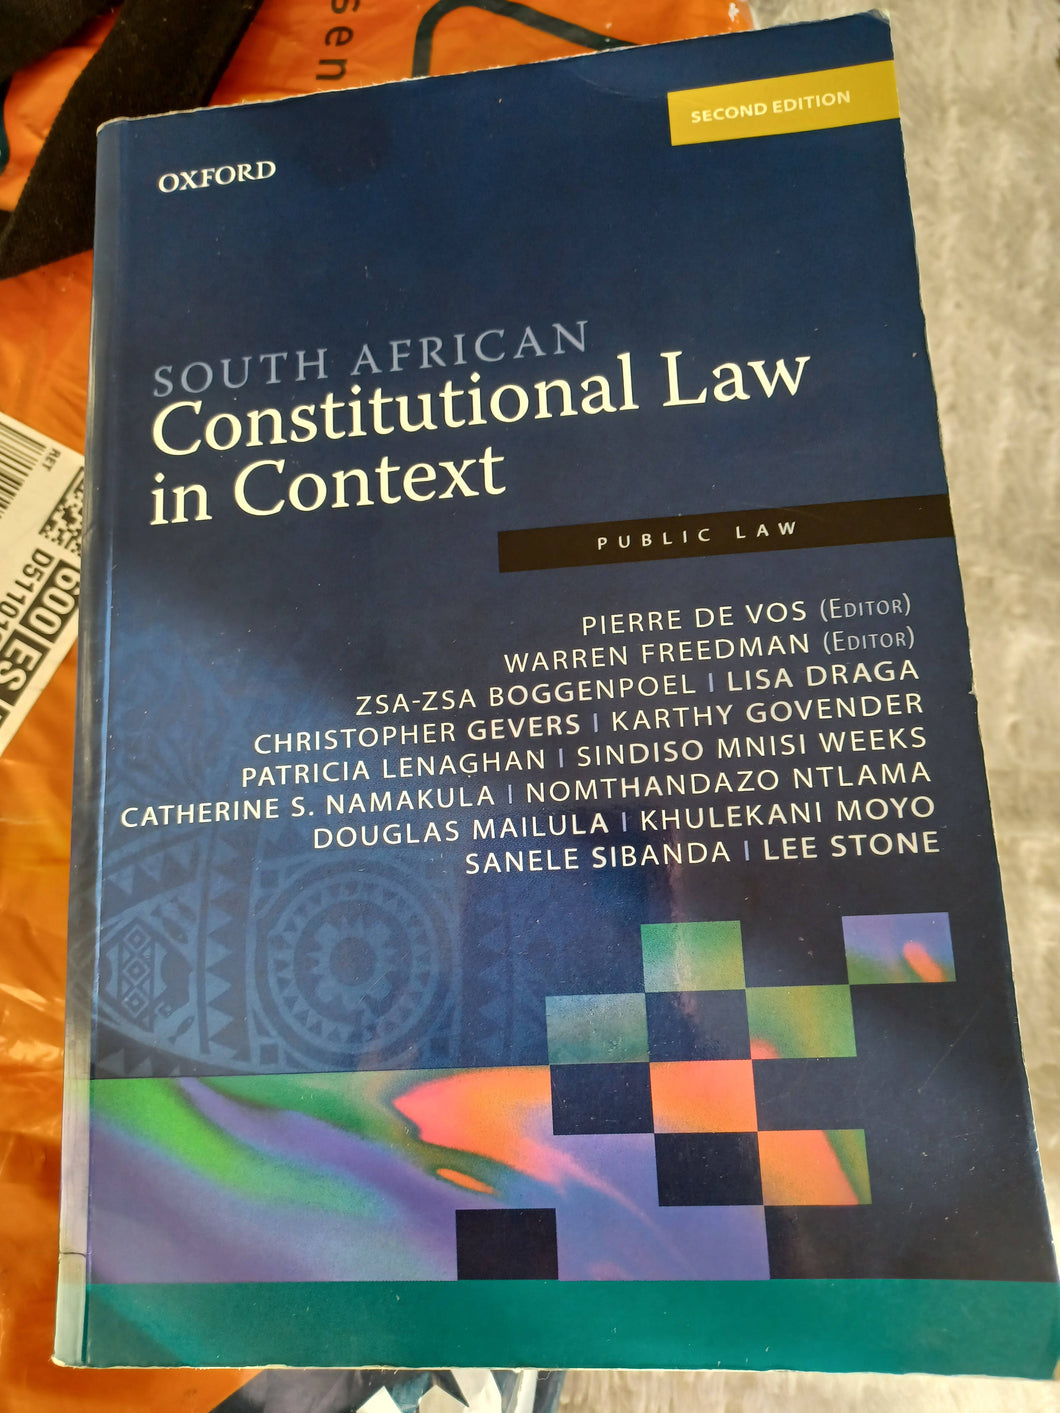 South African constitutional law in context